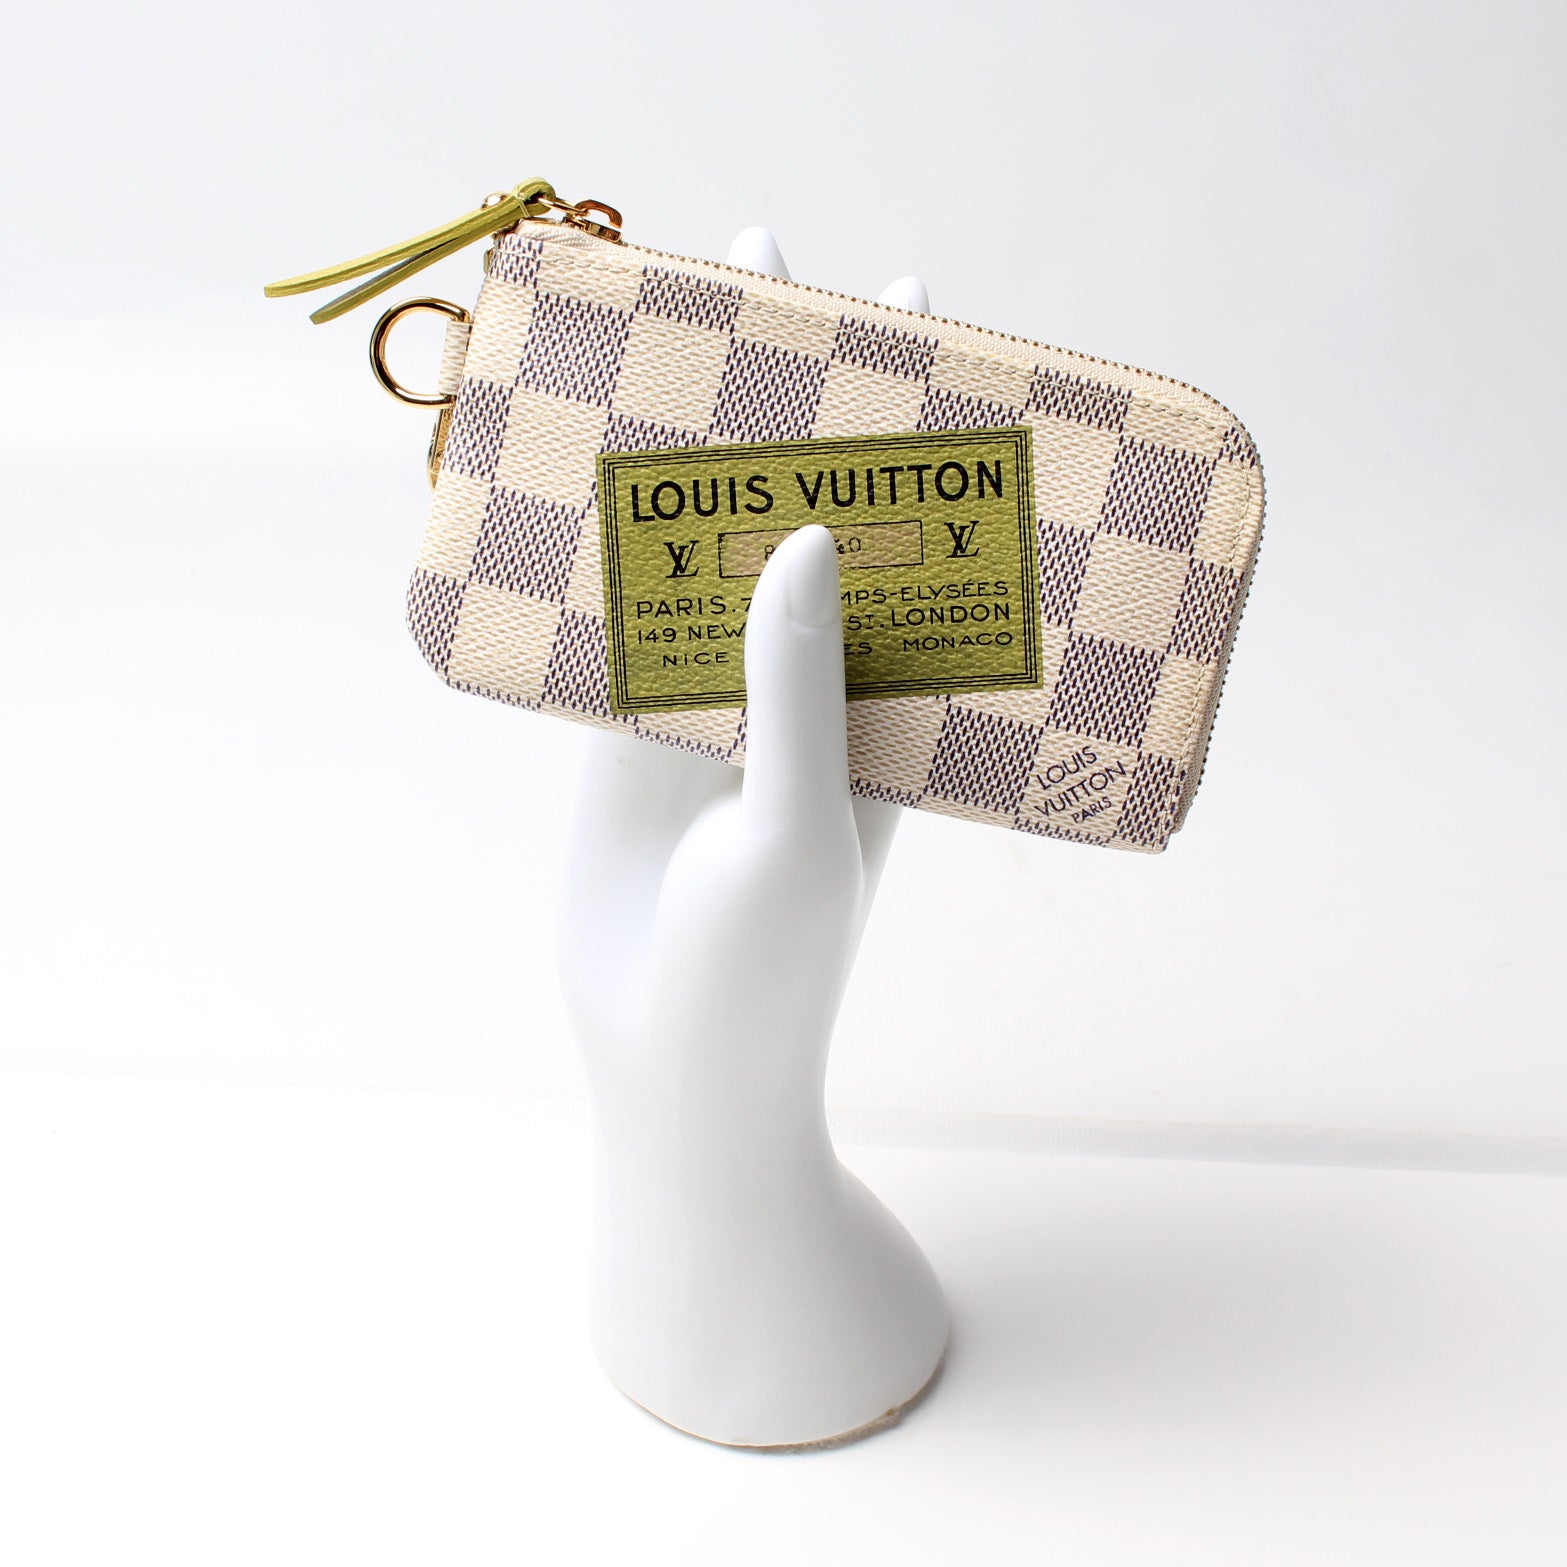 Limited Edition Louis Vuitton Damier Azur Complice Trunks and Bags